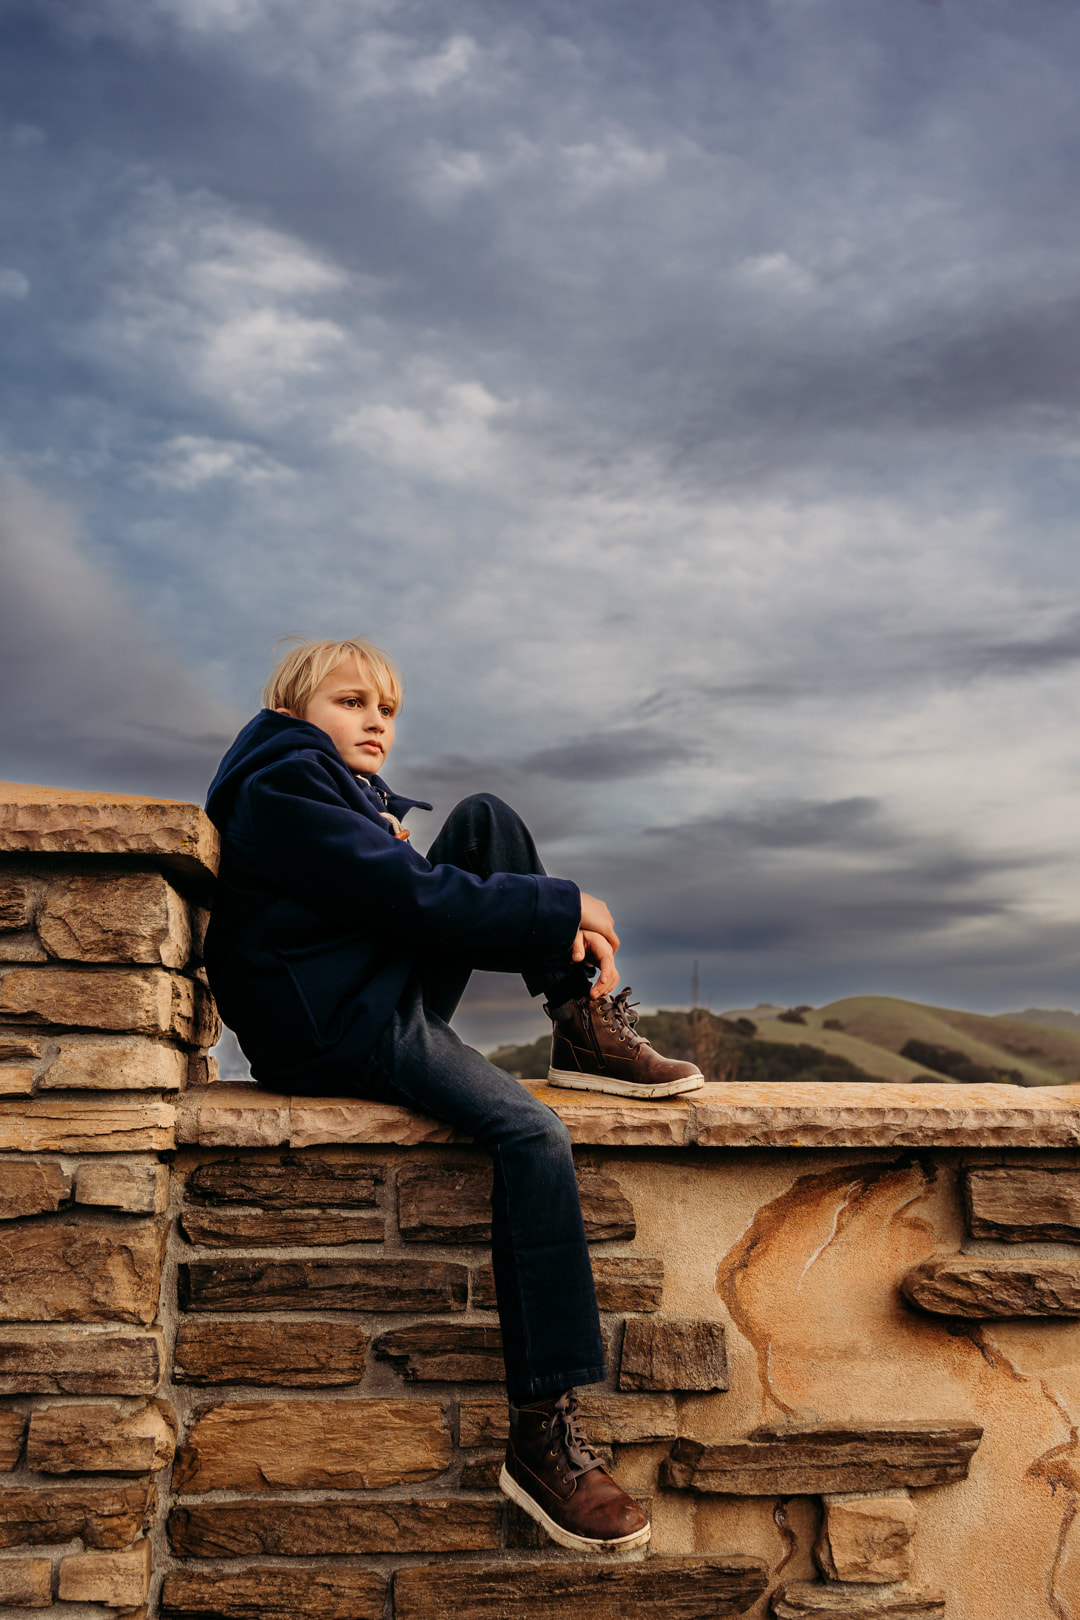 A quiet moment during family pictures when the son sits on a wall and gazes at the impending cloud line over the Pleasanton hills.